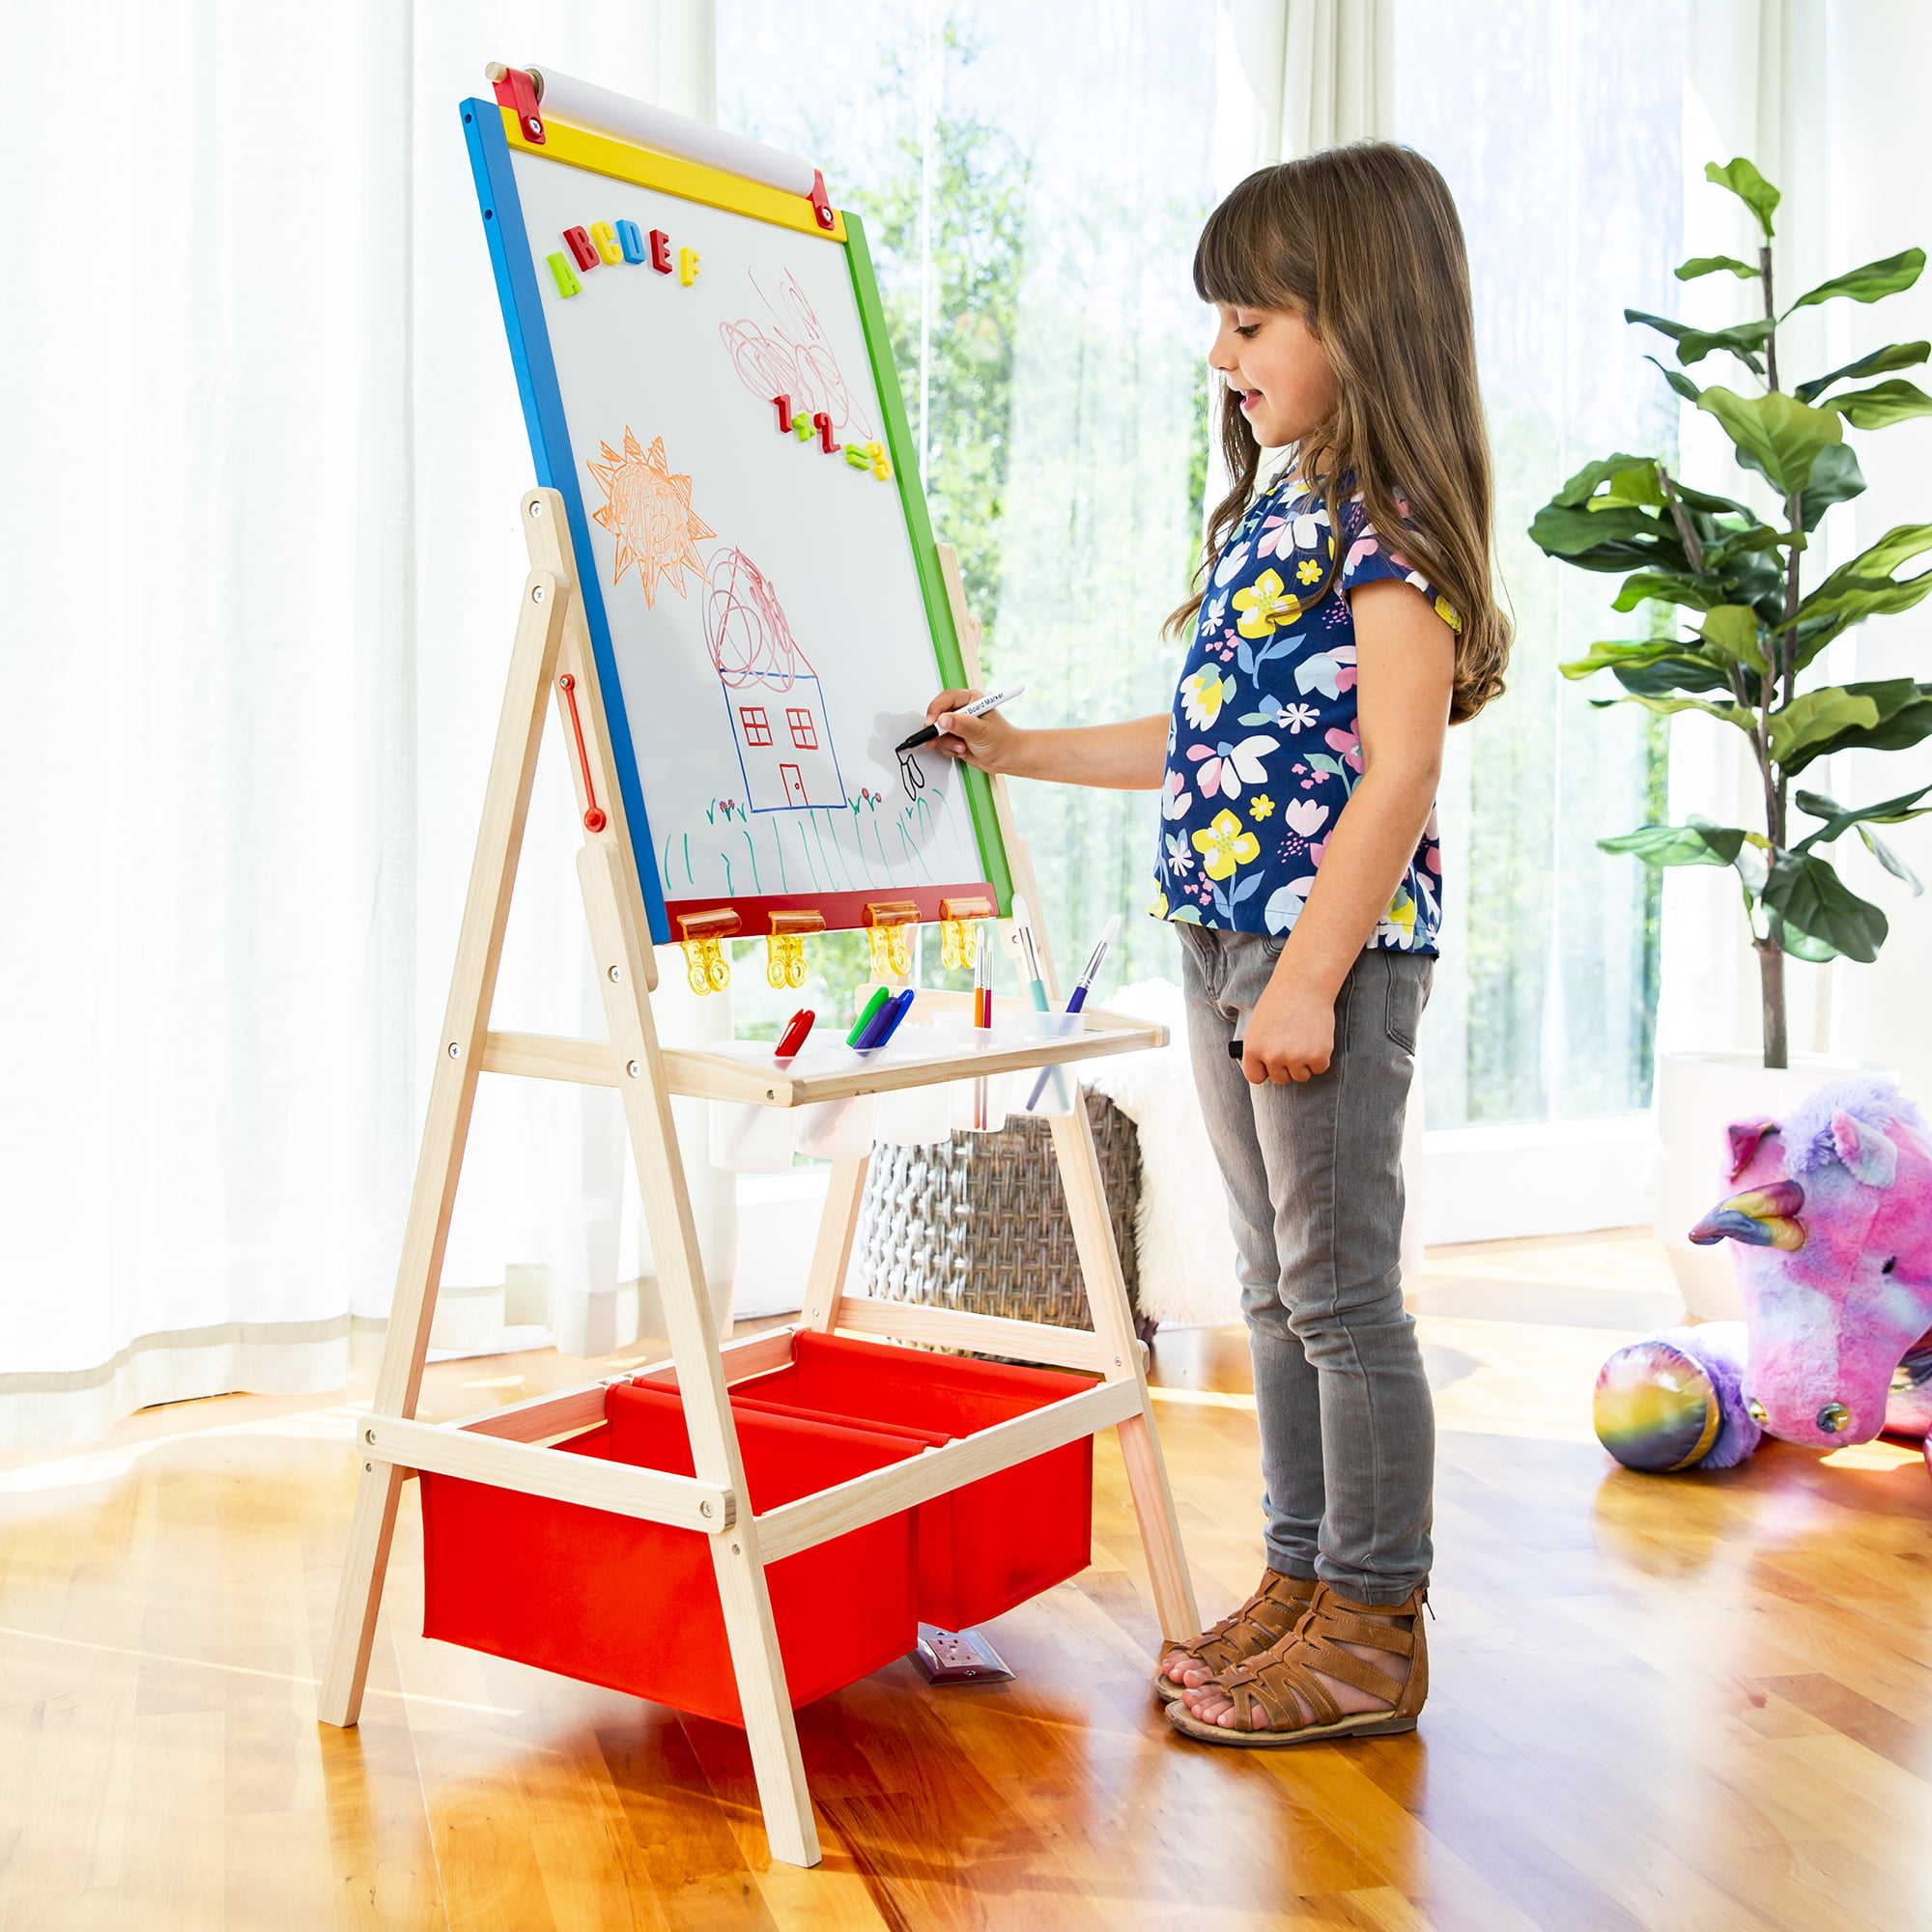 Duke Baby 3-in-1 Kids Art Easel with Dry-Erase Board, Chalkboard, Paper Roll and Art Supply Storage- Green